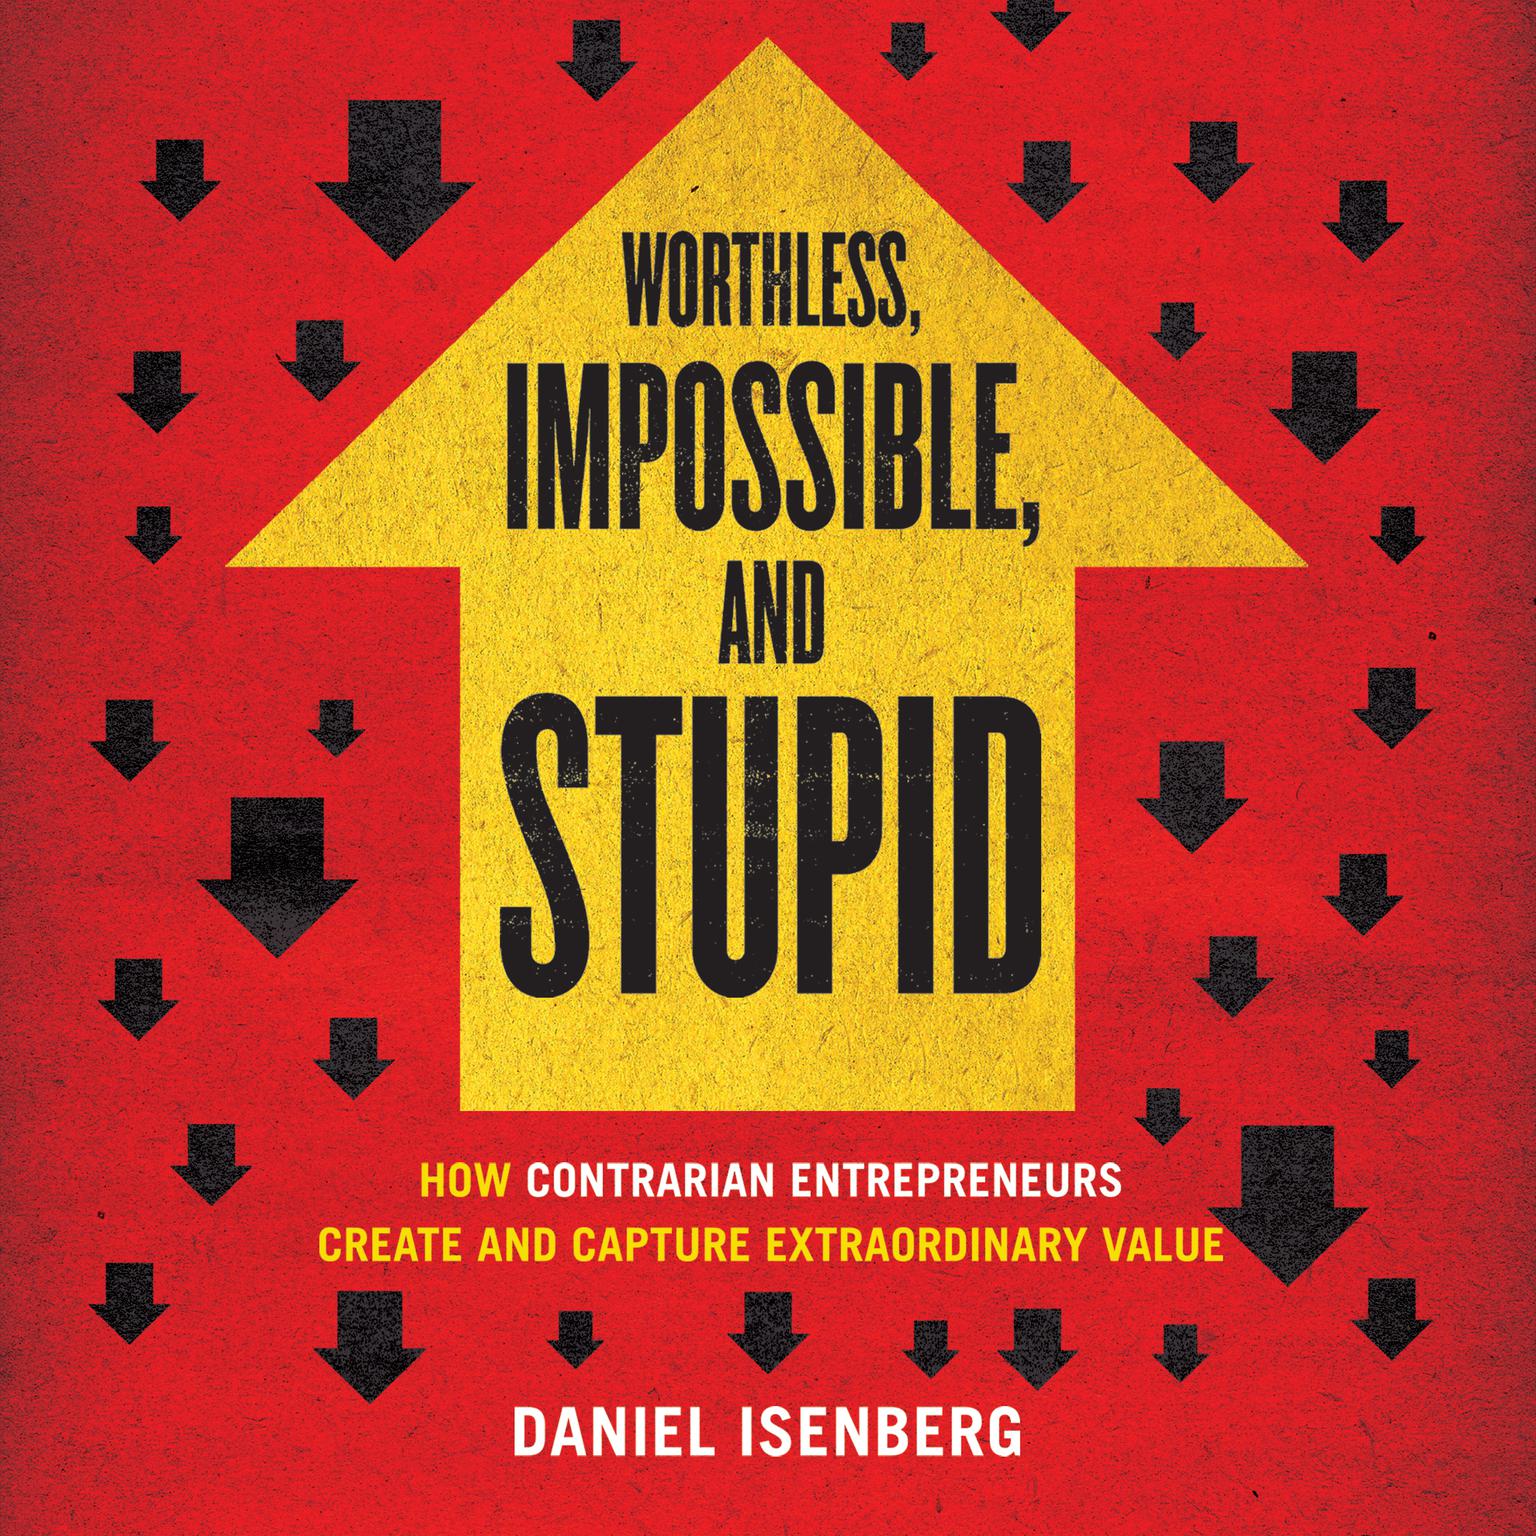 Worthless, Impossible, and Stupid: How Contrarian Entrepreneurs Create and Capture Extraordinary Value Audiobook, by Daniel Isenberg